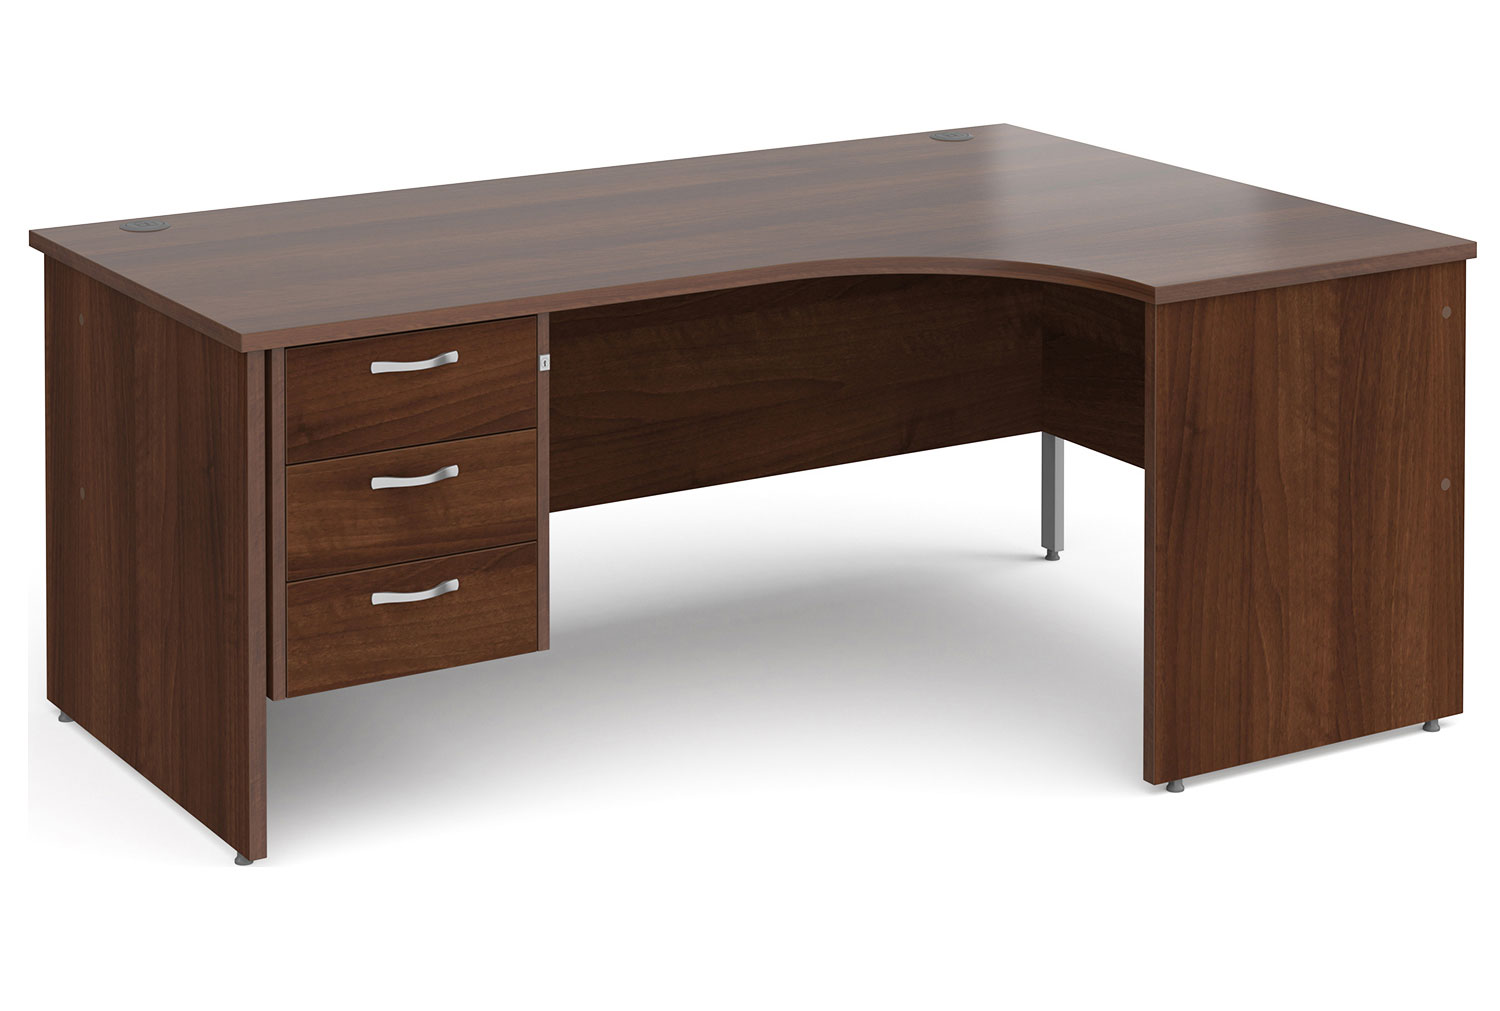 Tully Panel End Right Hand Ergonomic Office Desk 3 Drawers, 180wx120/80dx73h (cm), Walnut